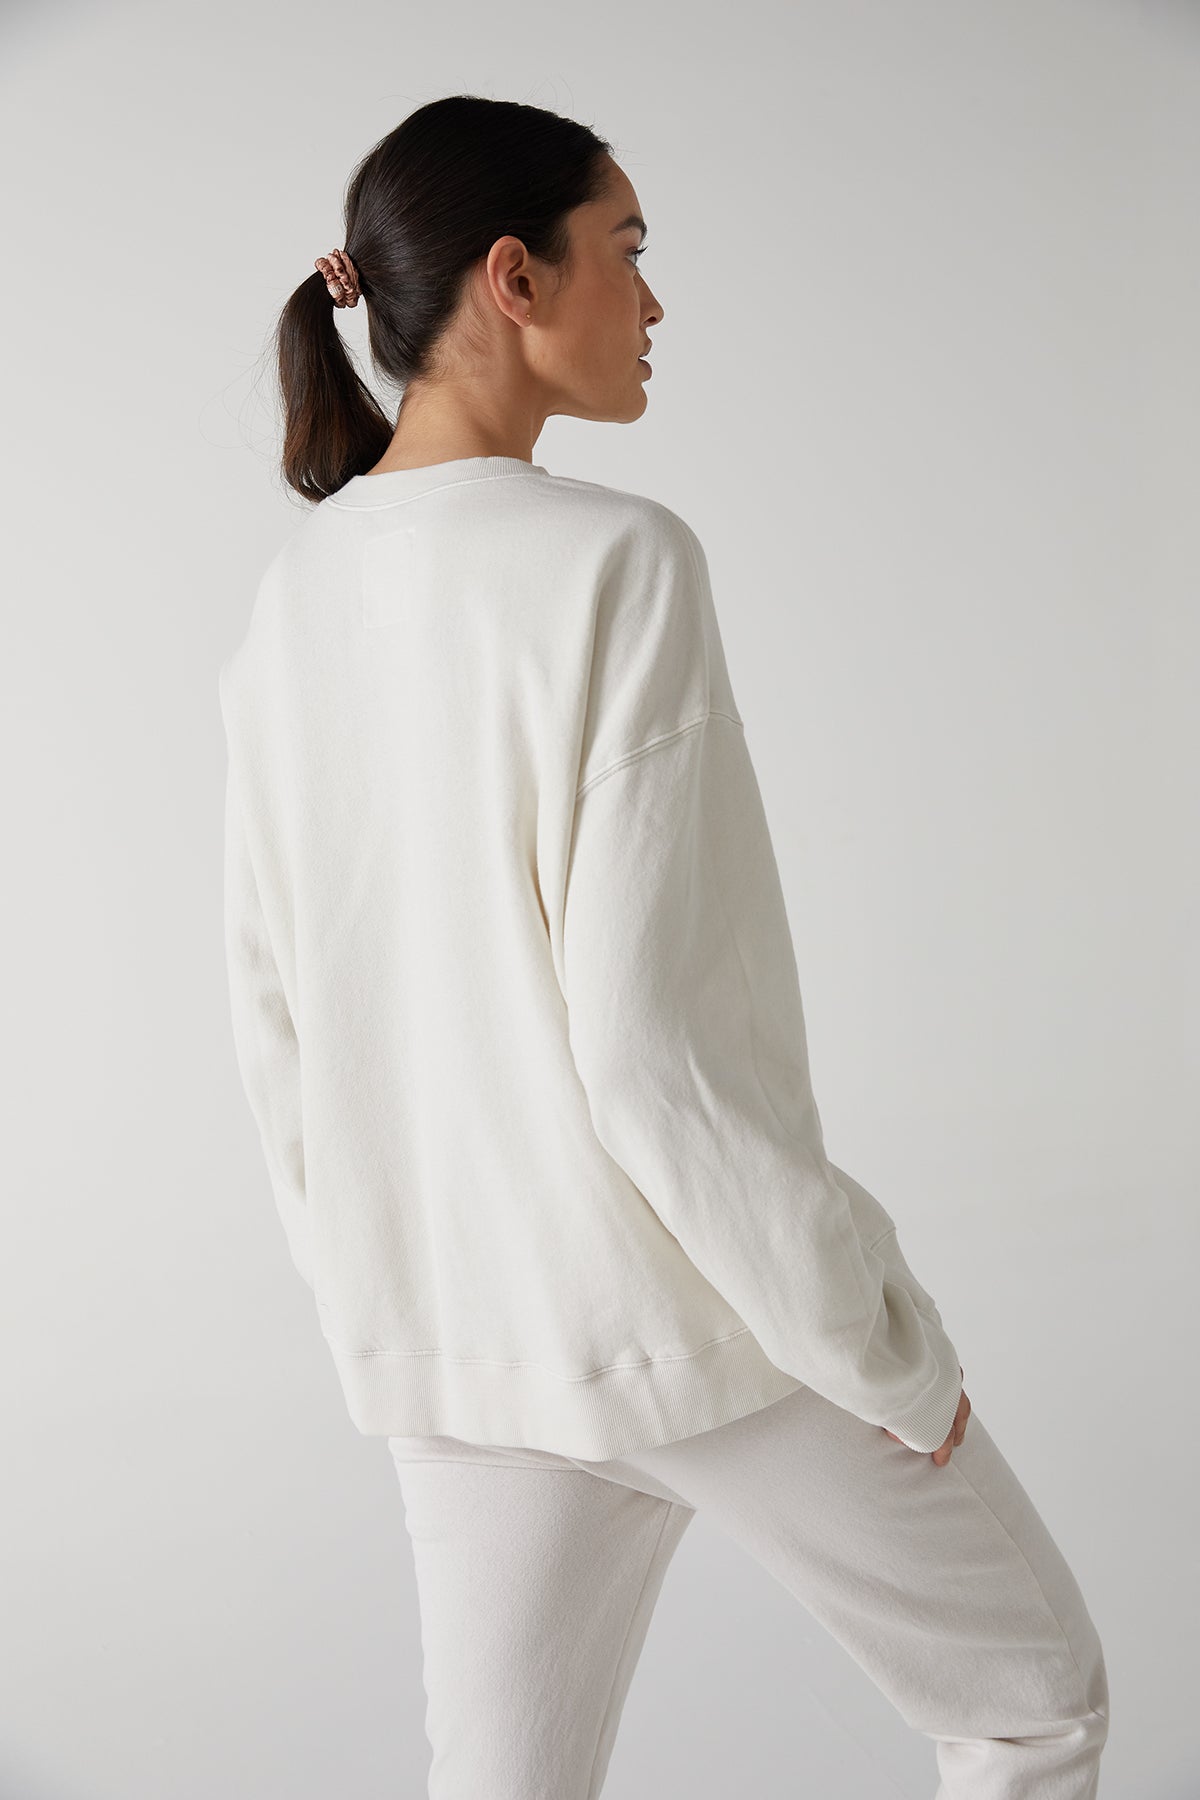 The back view of a woman wearing a Velvet by Jenny Graham ABBOT sweatshirt made of organic cotton and white pants, showcasing the slouch and styling versatility.-25483446157505